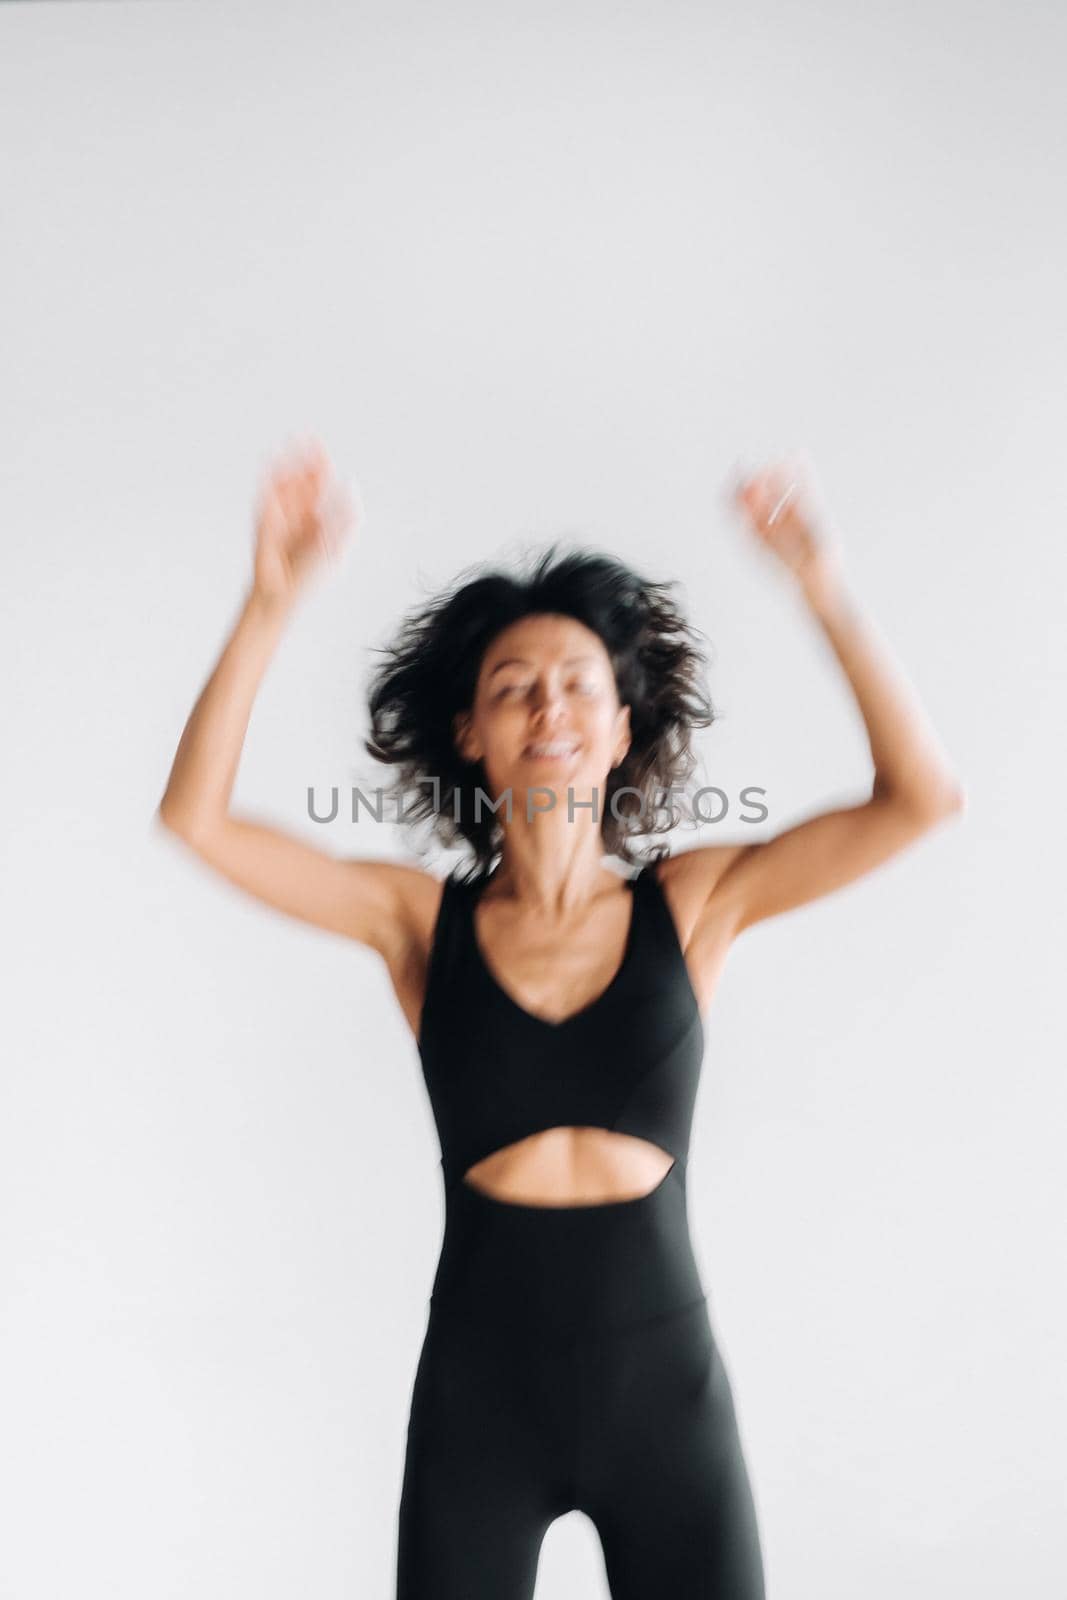 A blurry silhouette of a woman in black sportswear jumps up and raises her arms up against a white background.